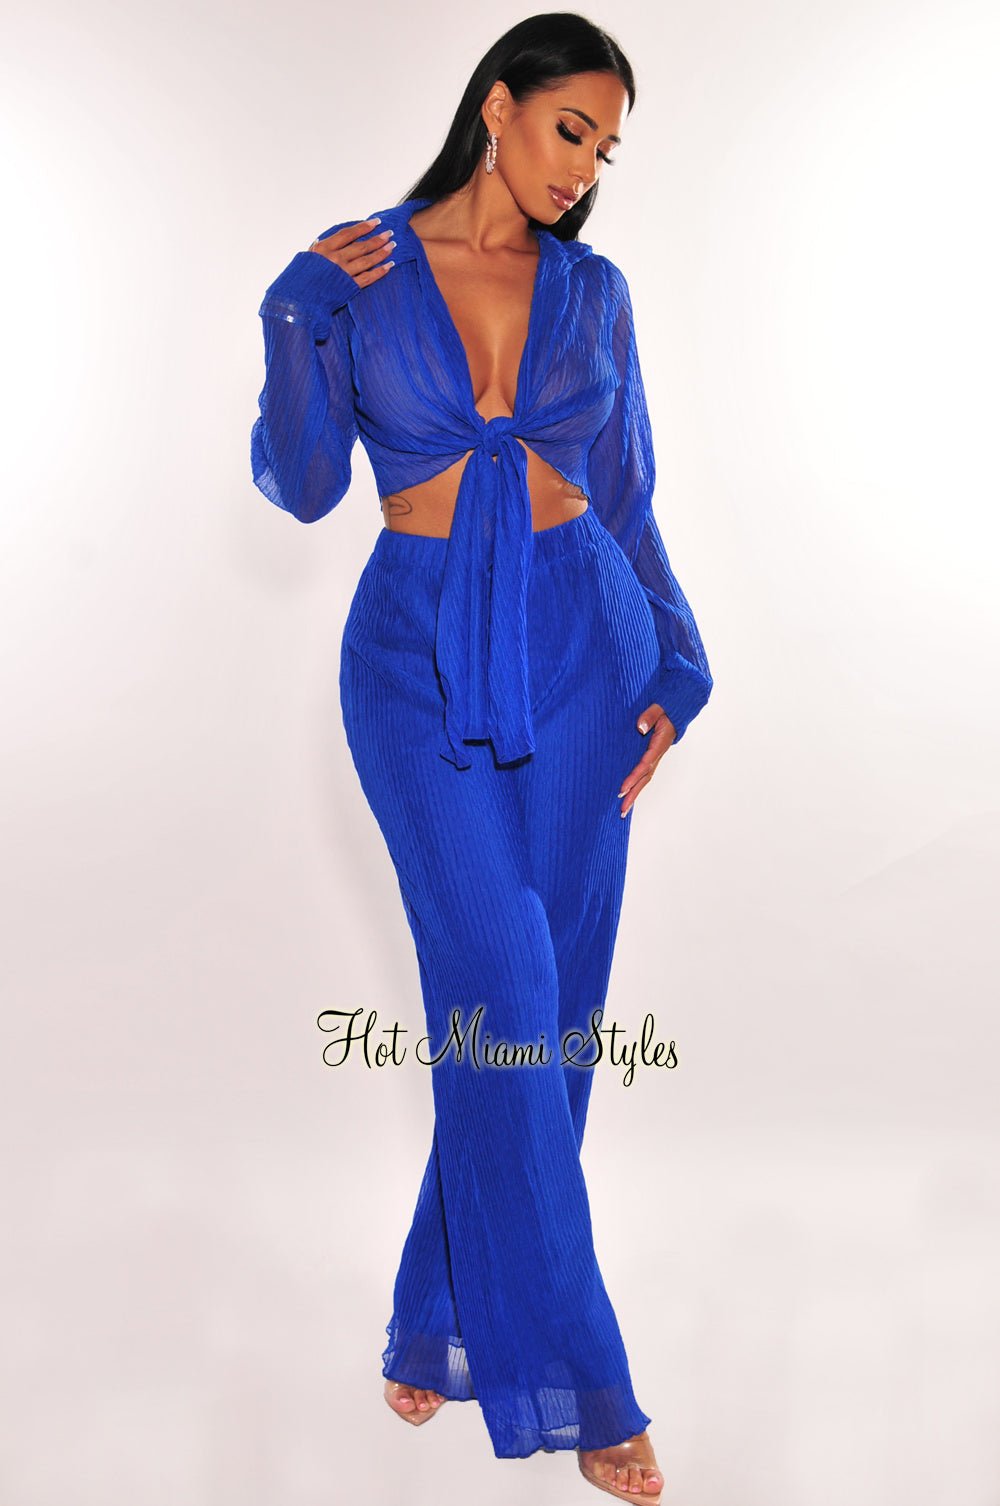 Royal Blue Sheer Pleated Collared Tie Up Palazzo Pants Two Piece